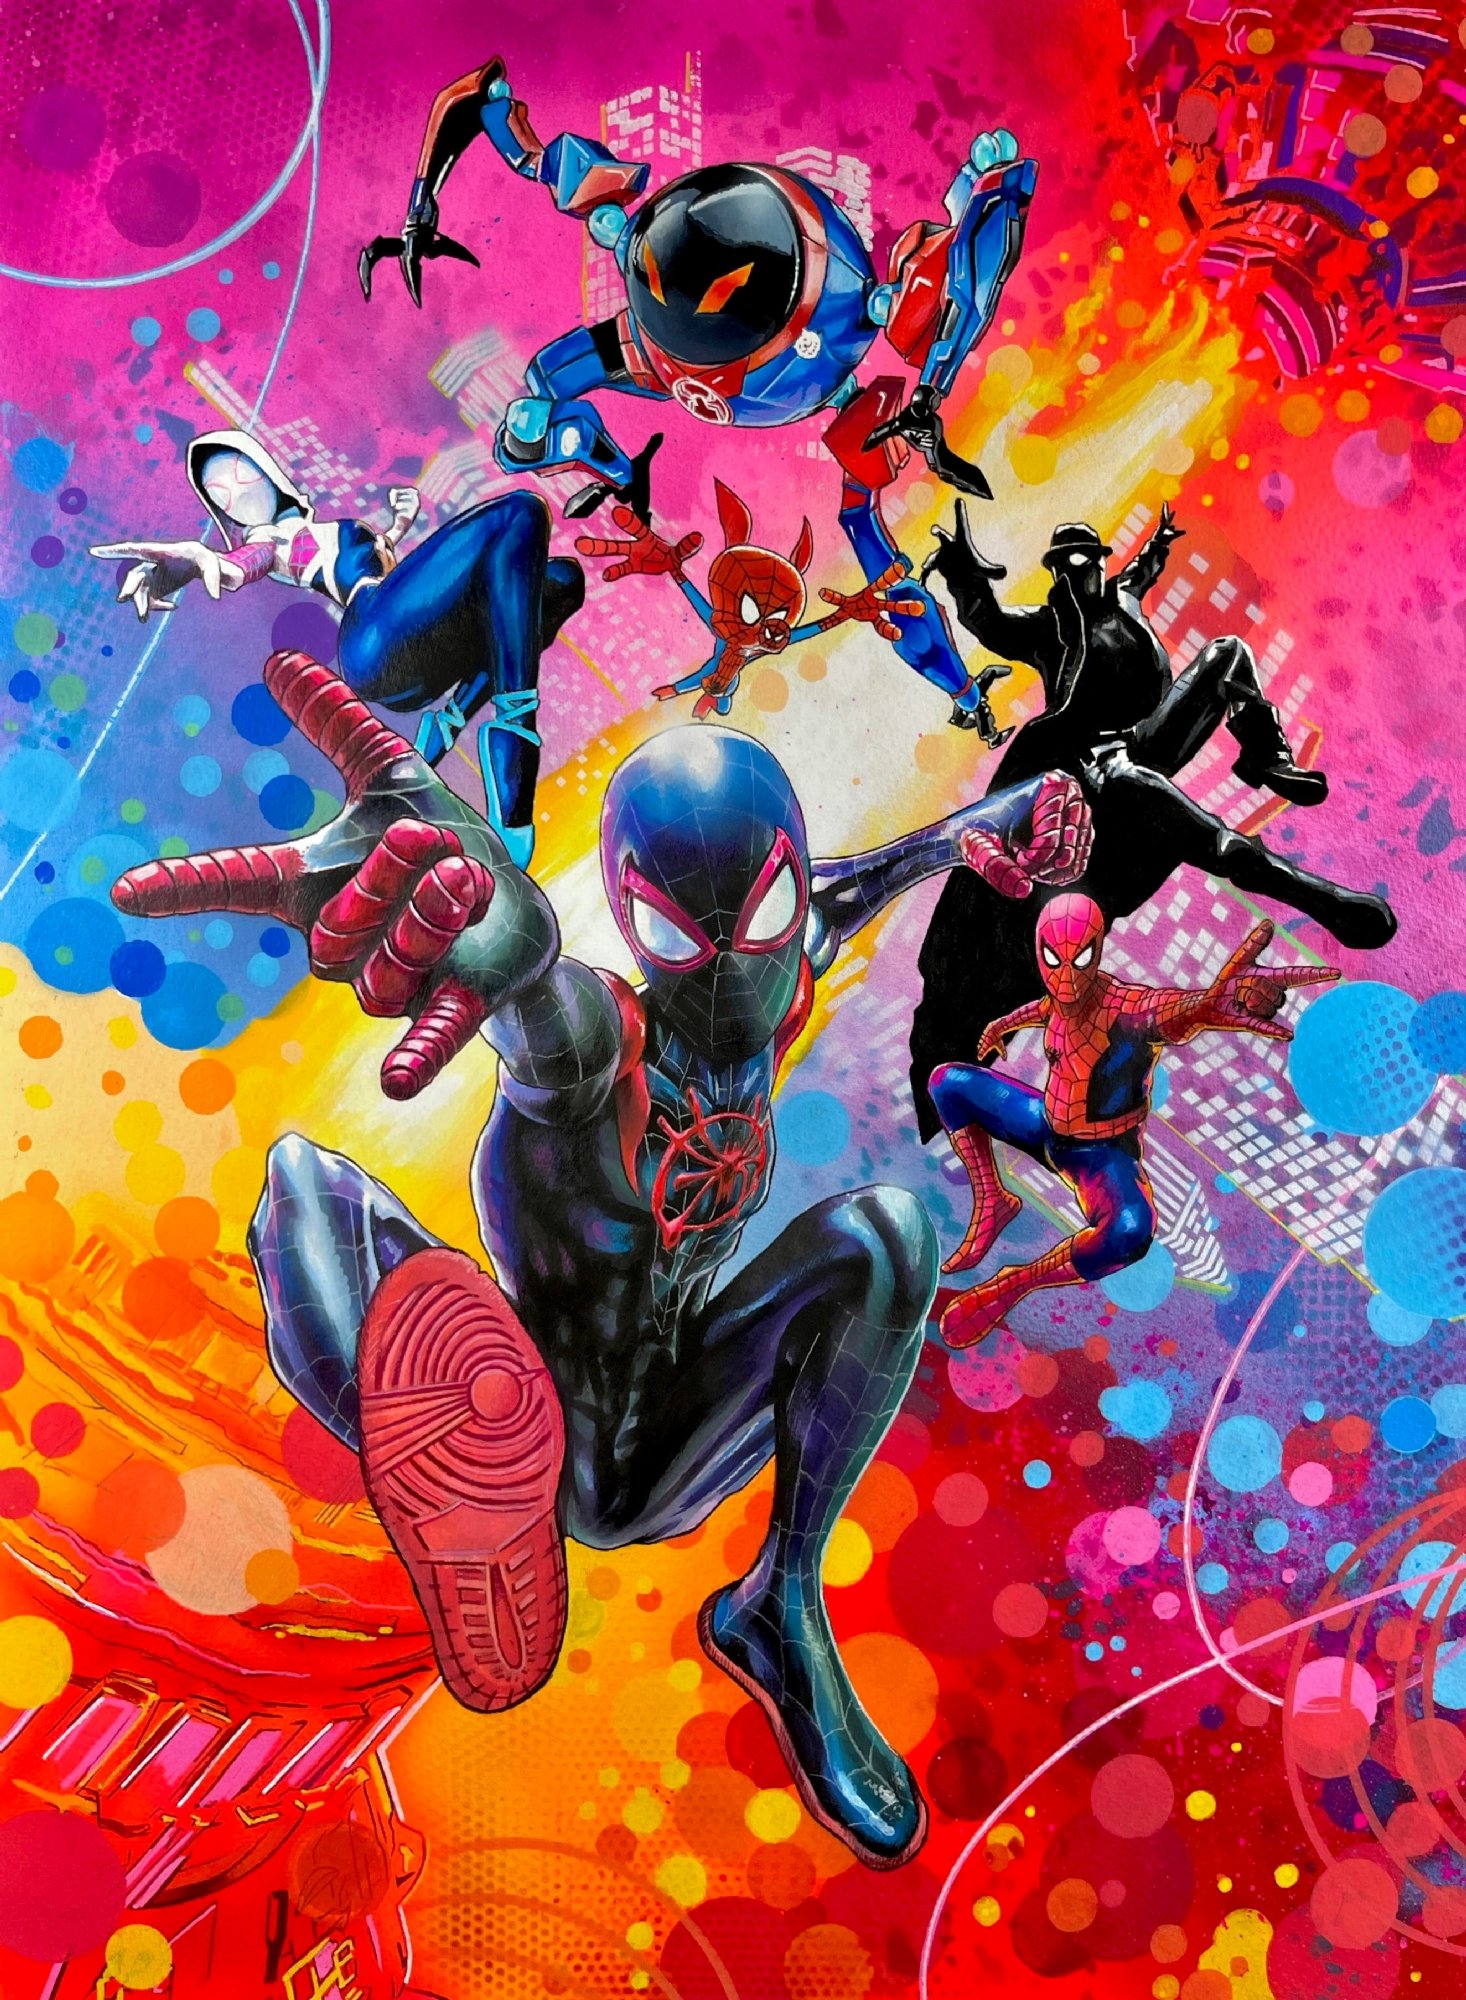 It took the artists on 'Spider-Man: Into the Spider-Verse' a